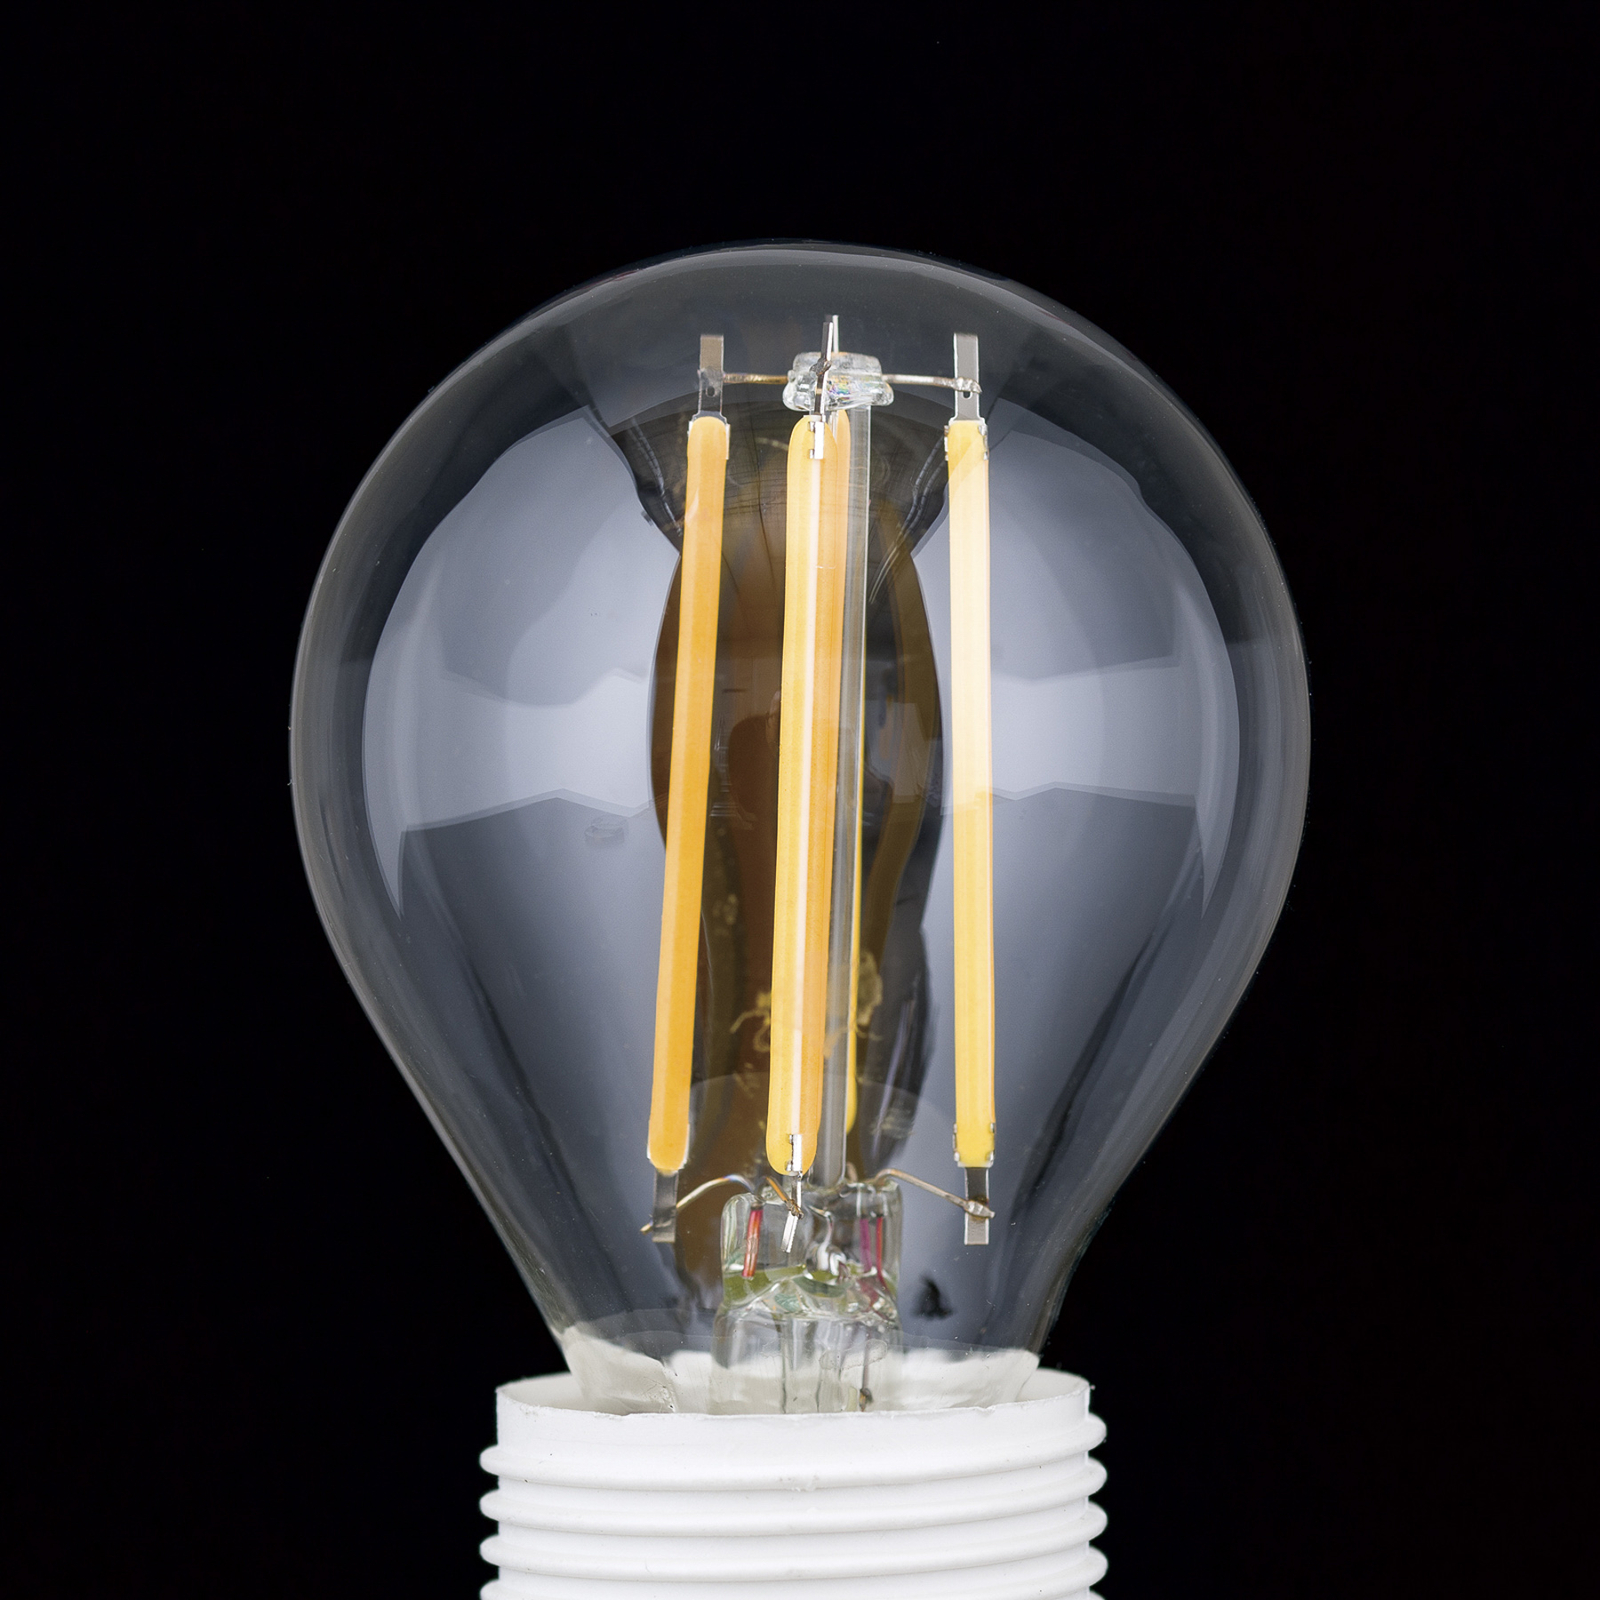 LED bulb Filament E27 G45 clear 6W 827 720lm dimmable